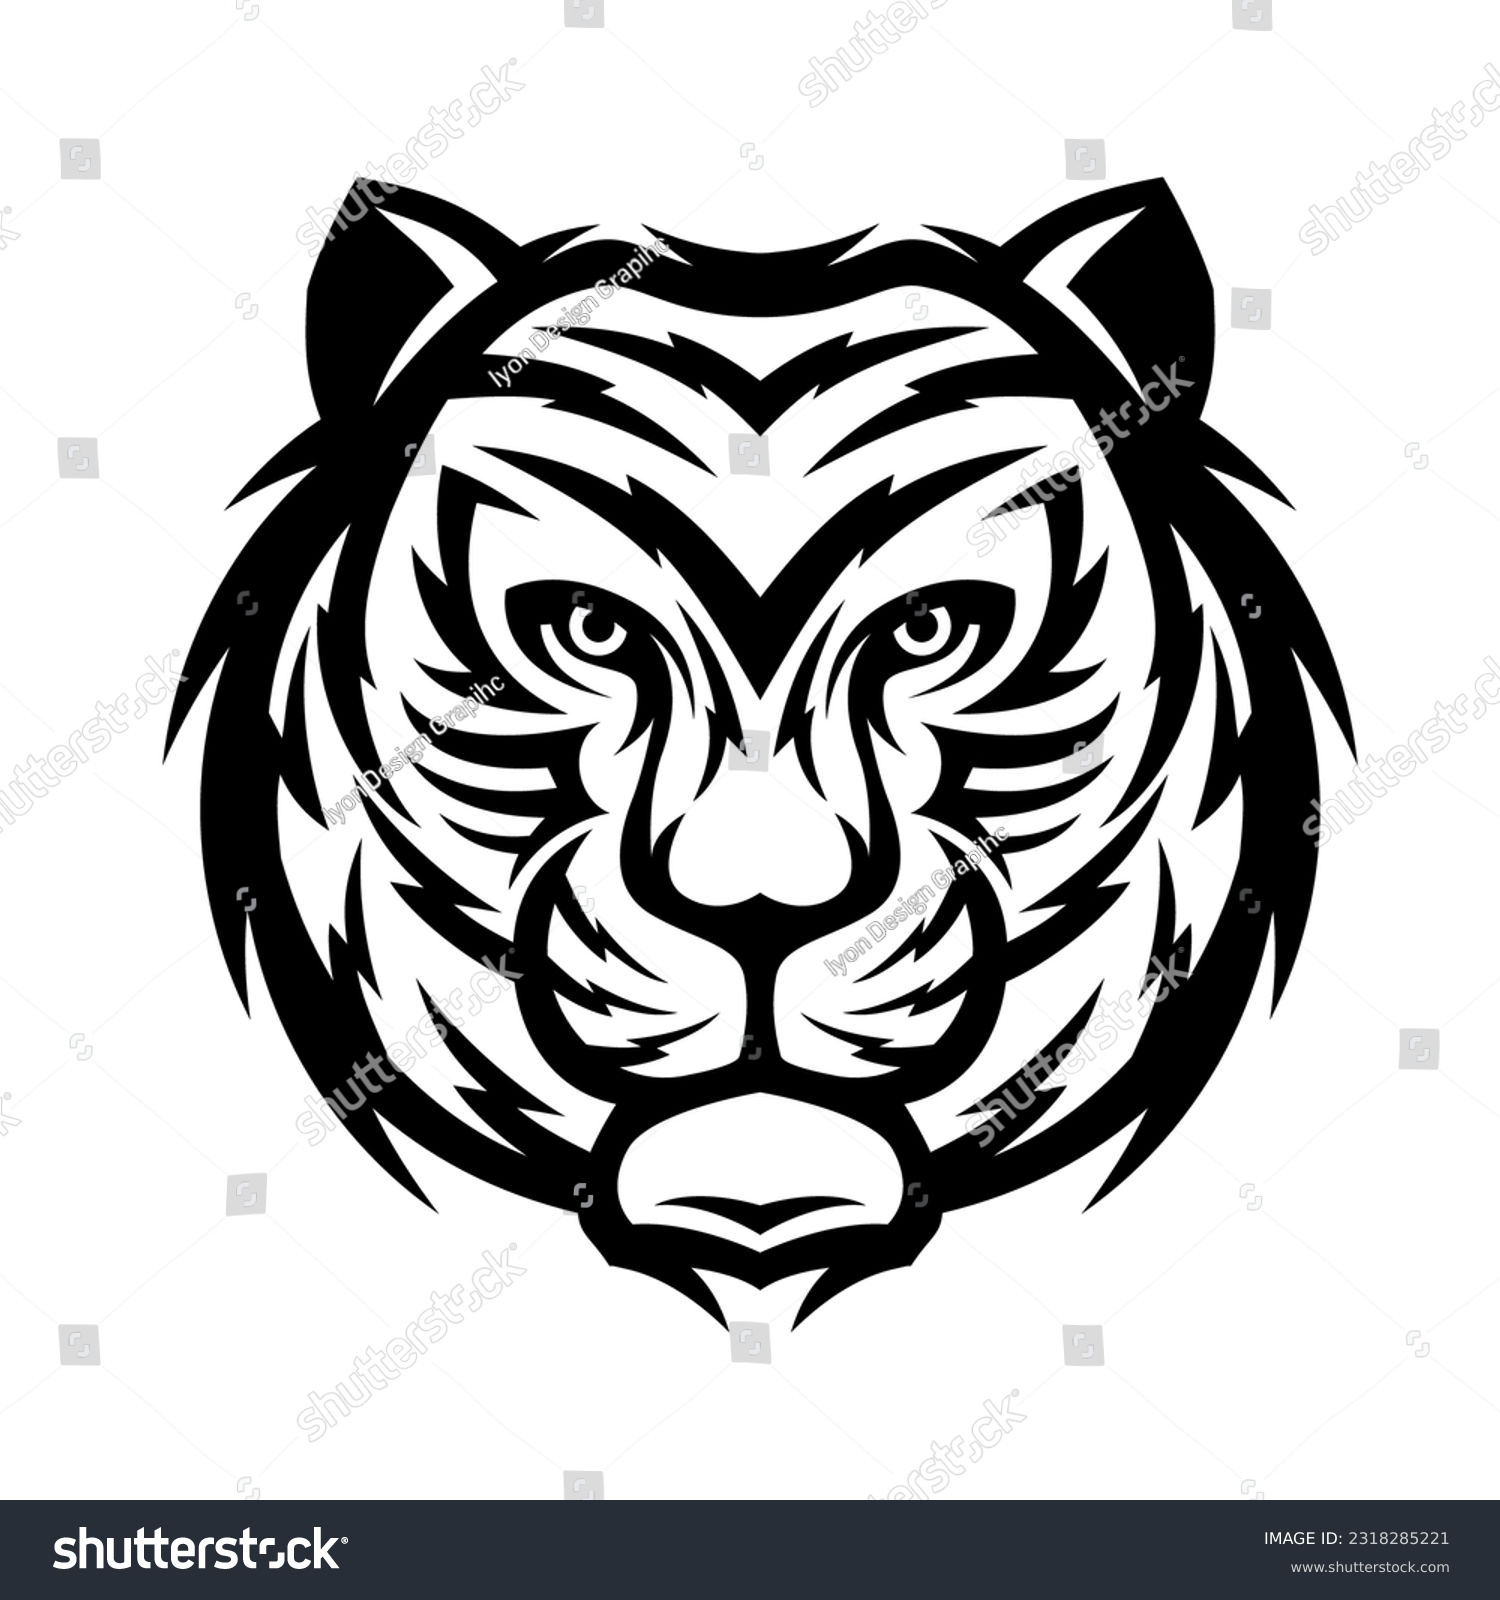 SVG of Vector tiger head, face for retro logos, emblems, badges, labels template and t-shirt vintage design element. Isolated on white background svg